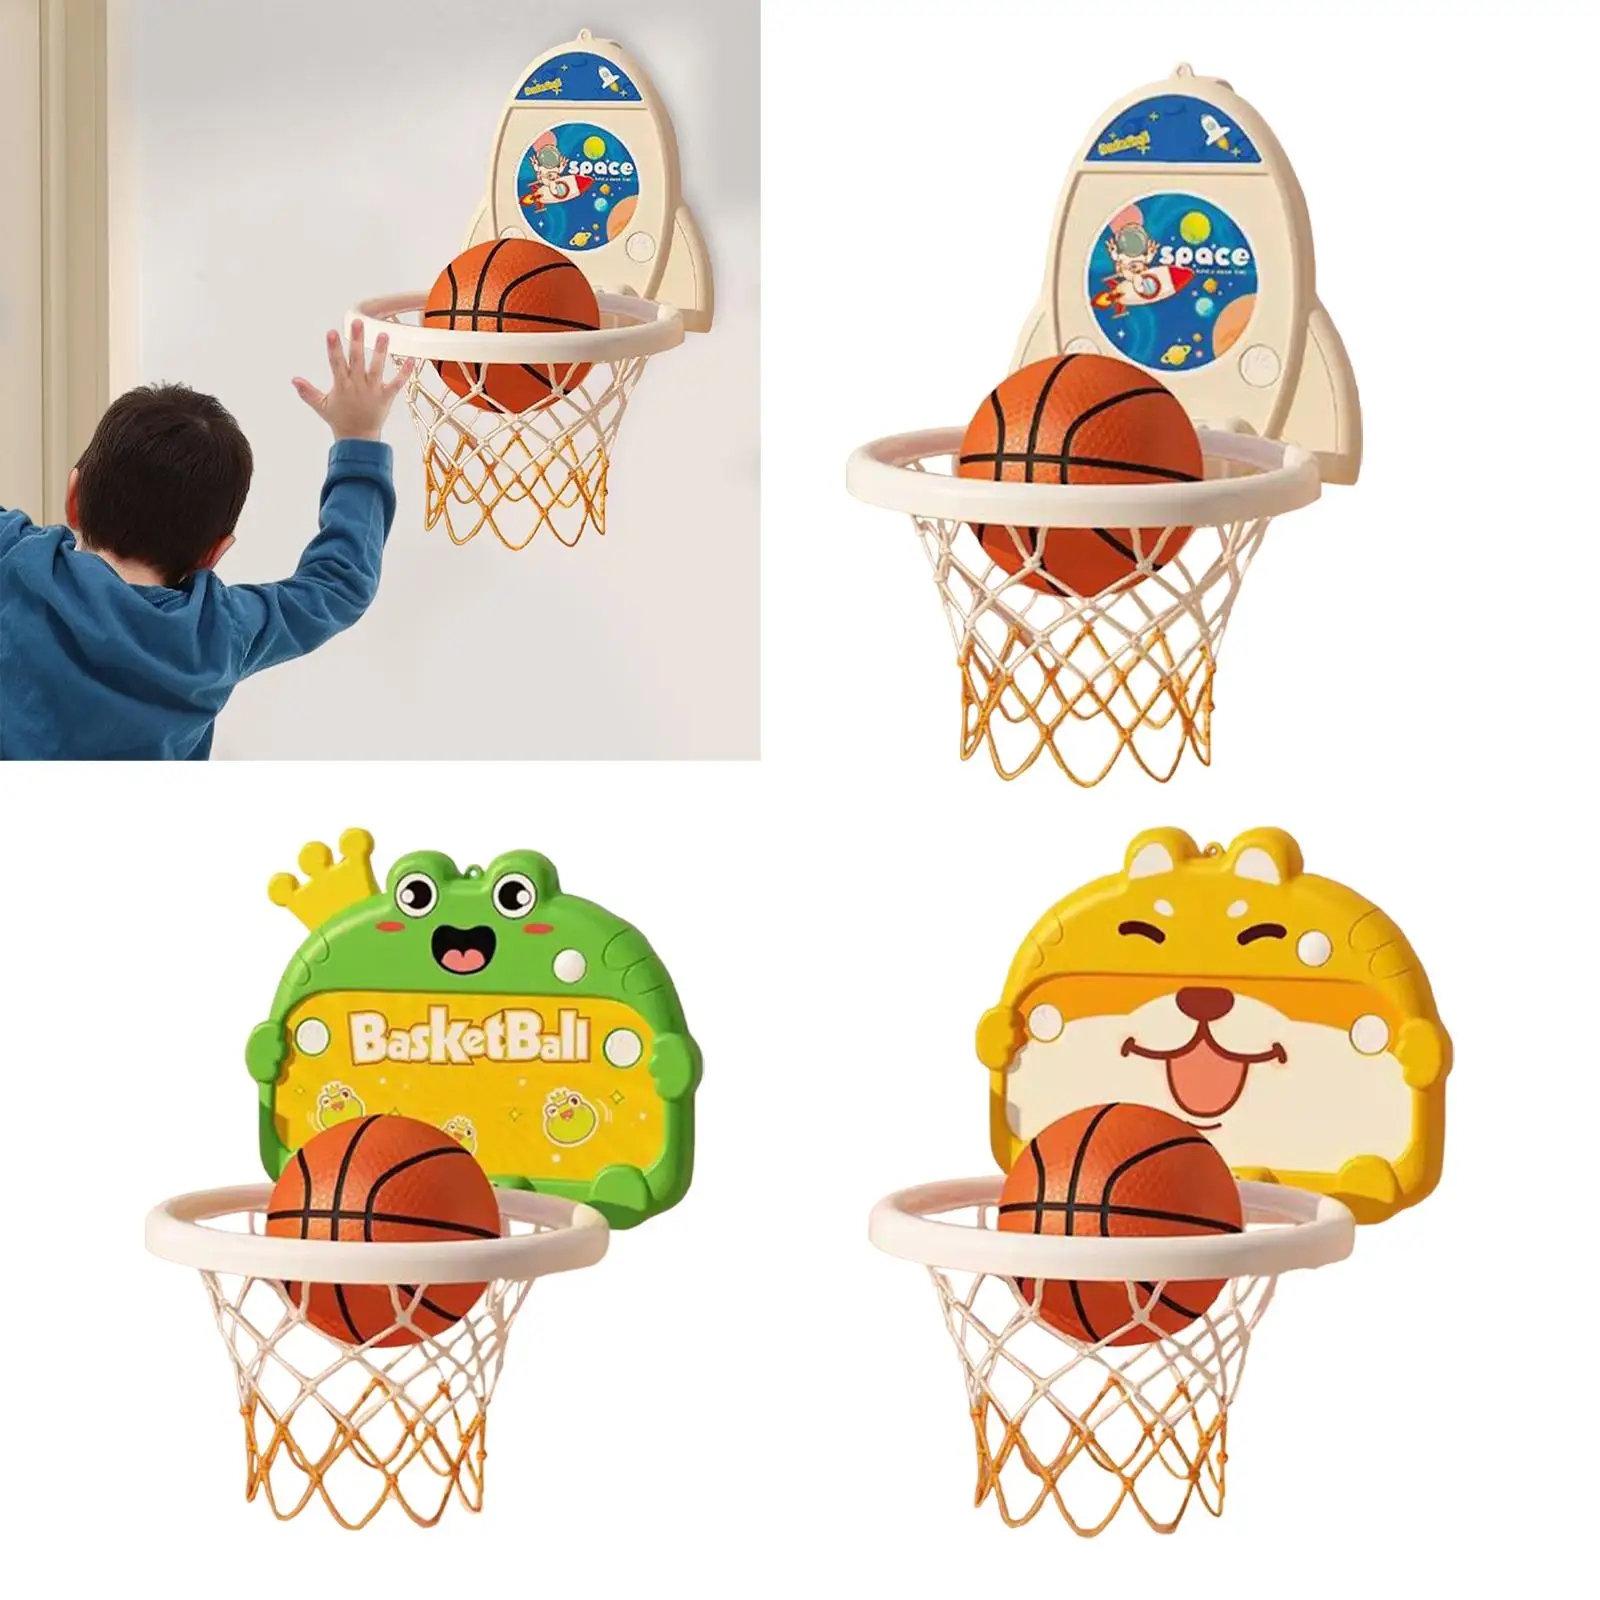 Mini Basketball Hoop Set Saving Educational Family Games with Basketball for Living Room Indoor Bedroom Holiday Gifts